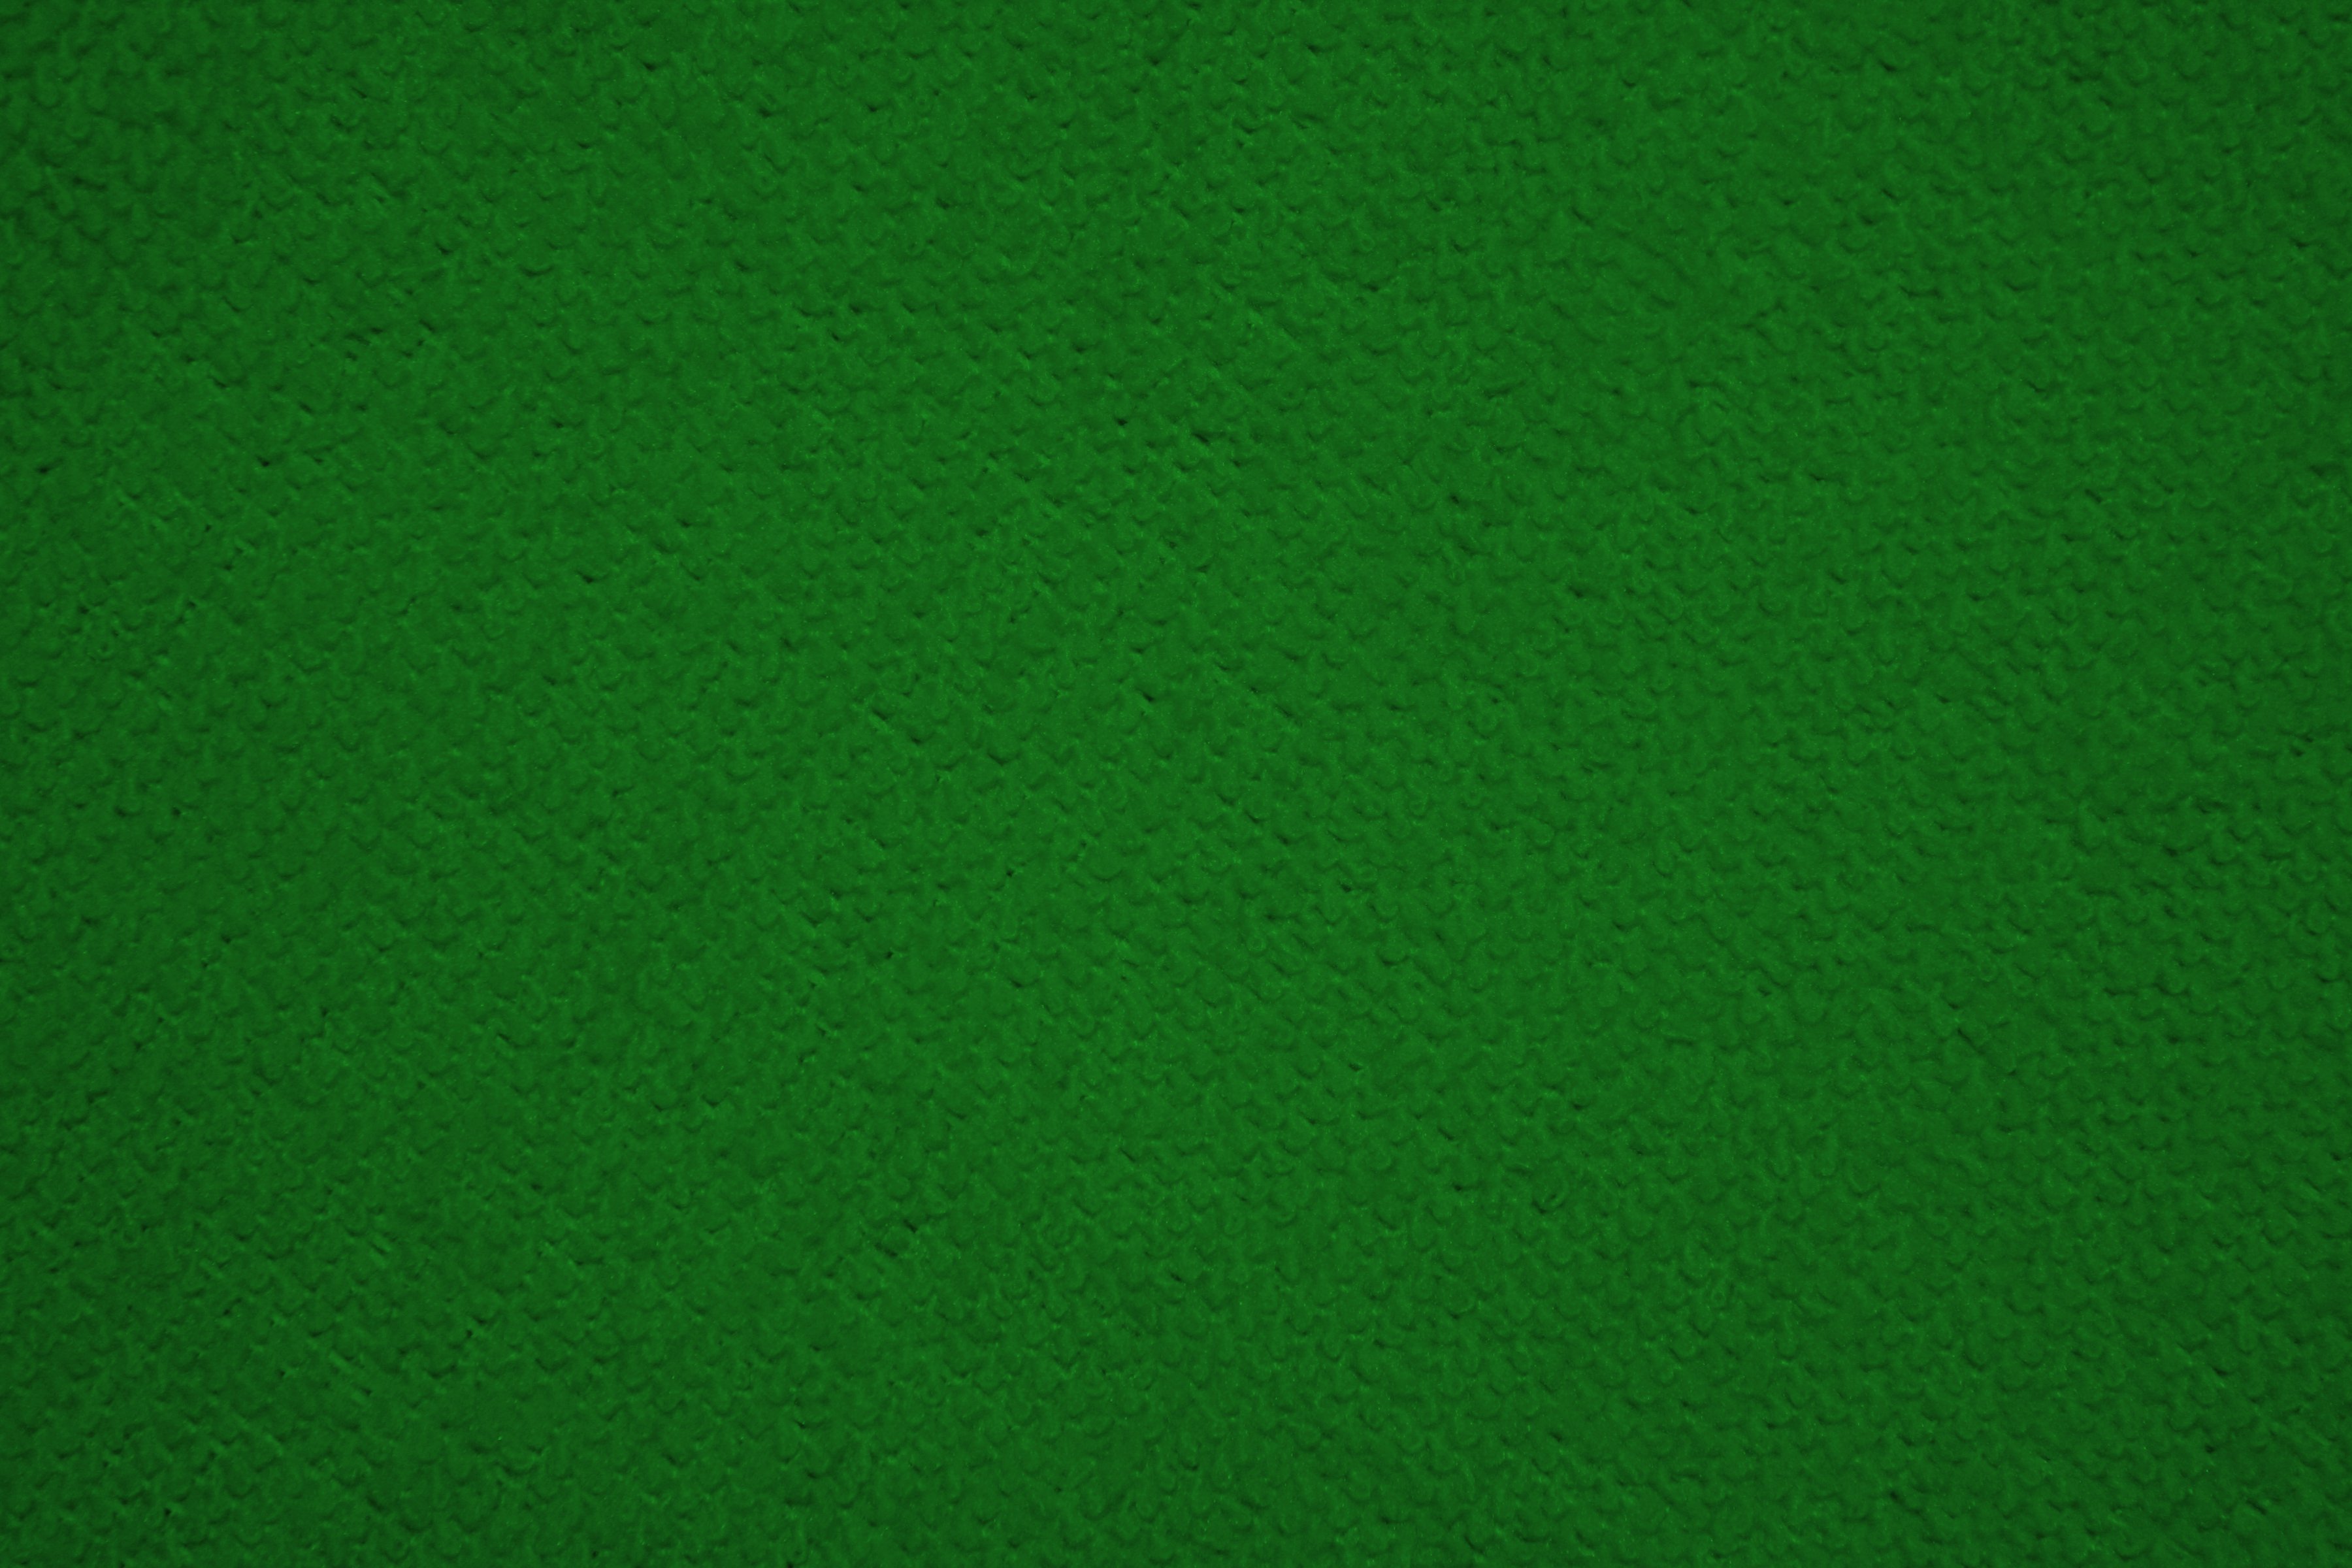 Kelly Green Microfiber Cloth Fabric Texture Picture Free Photograph